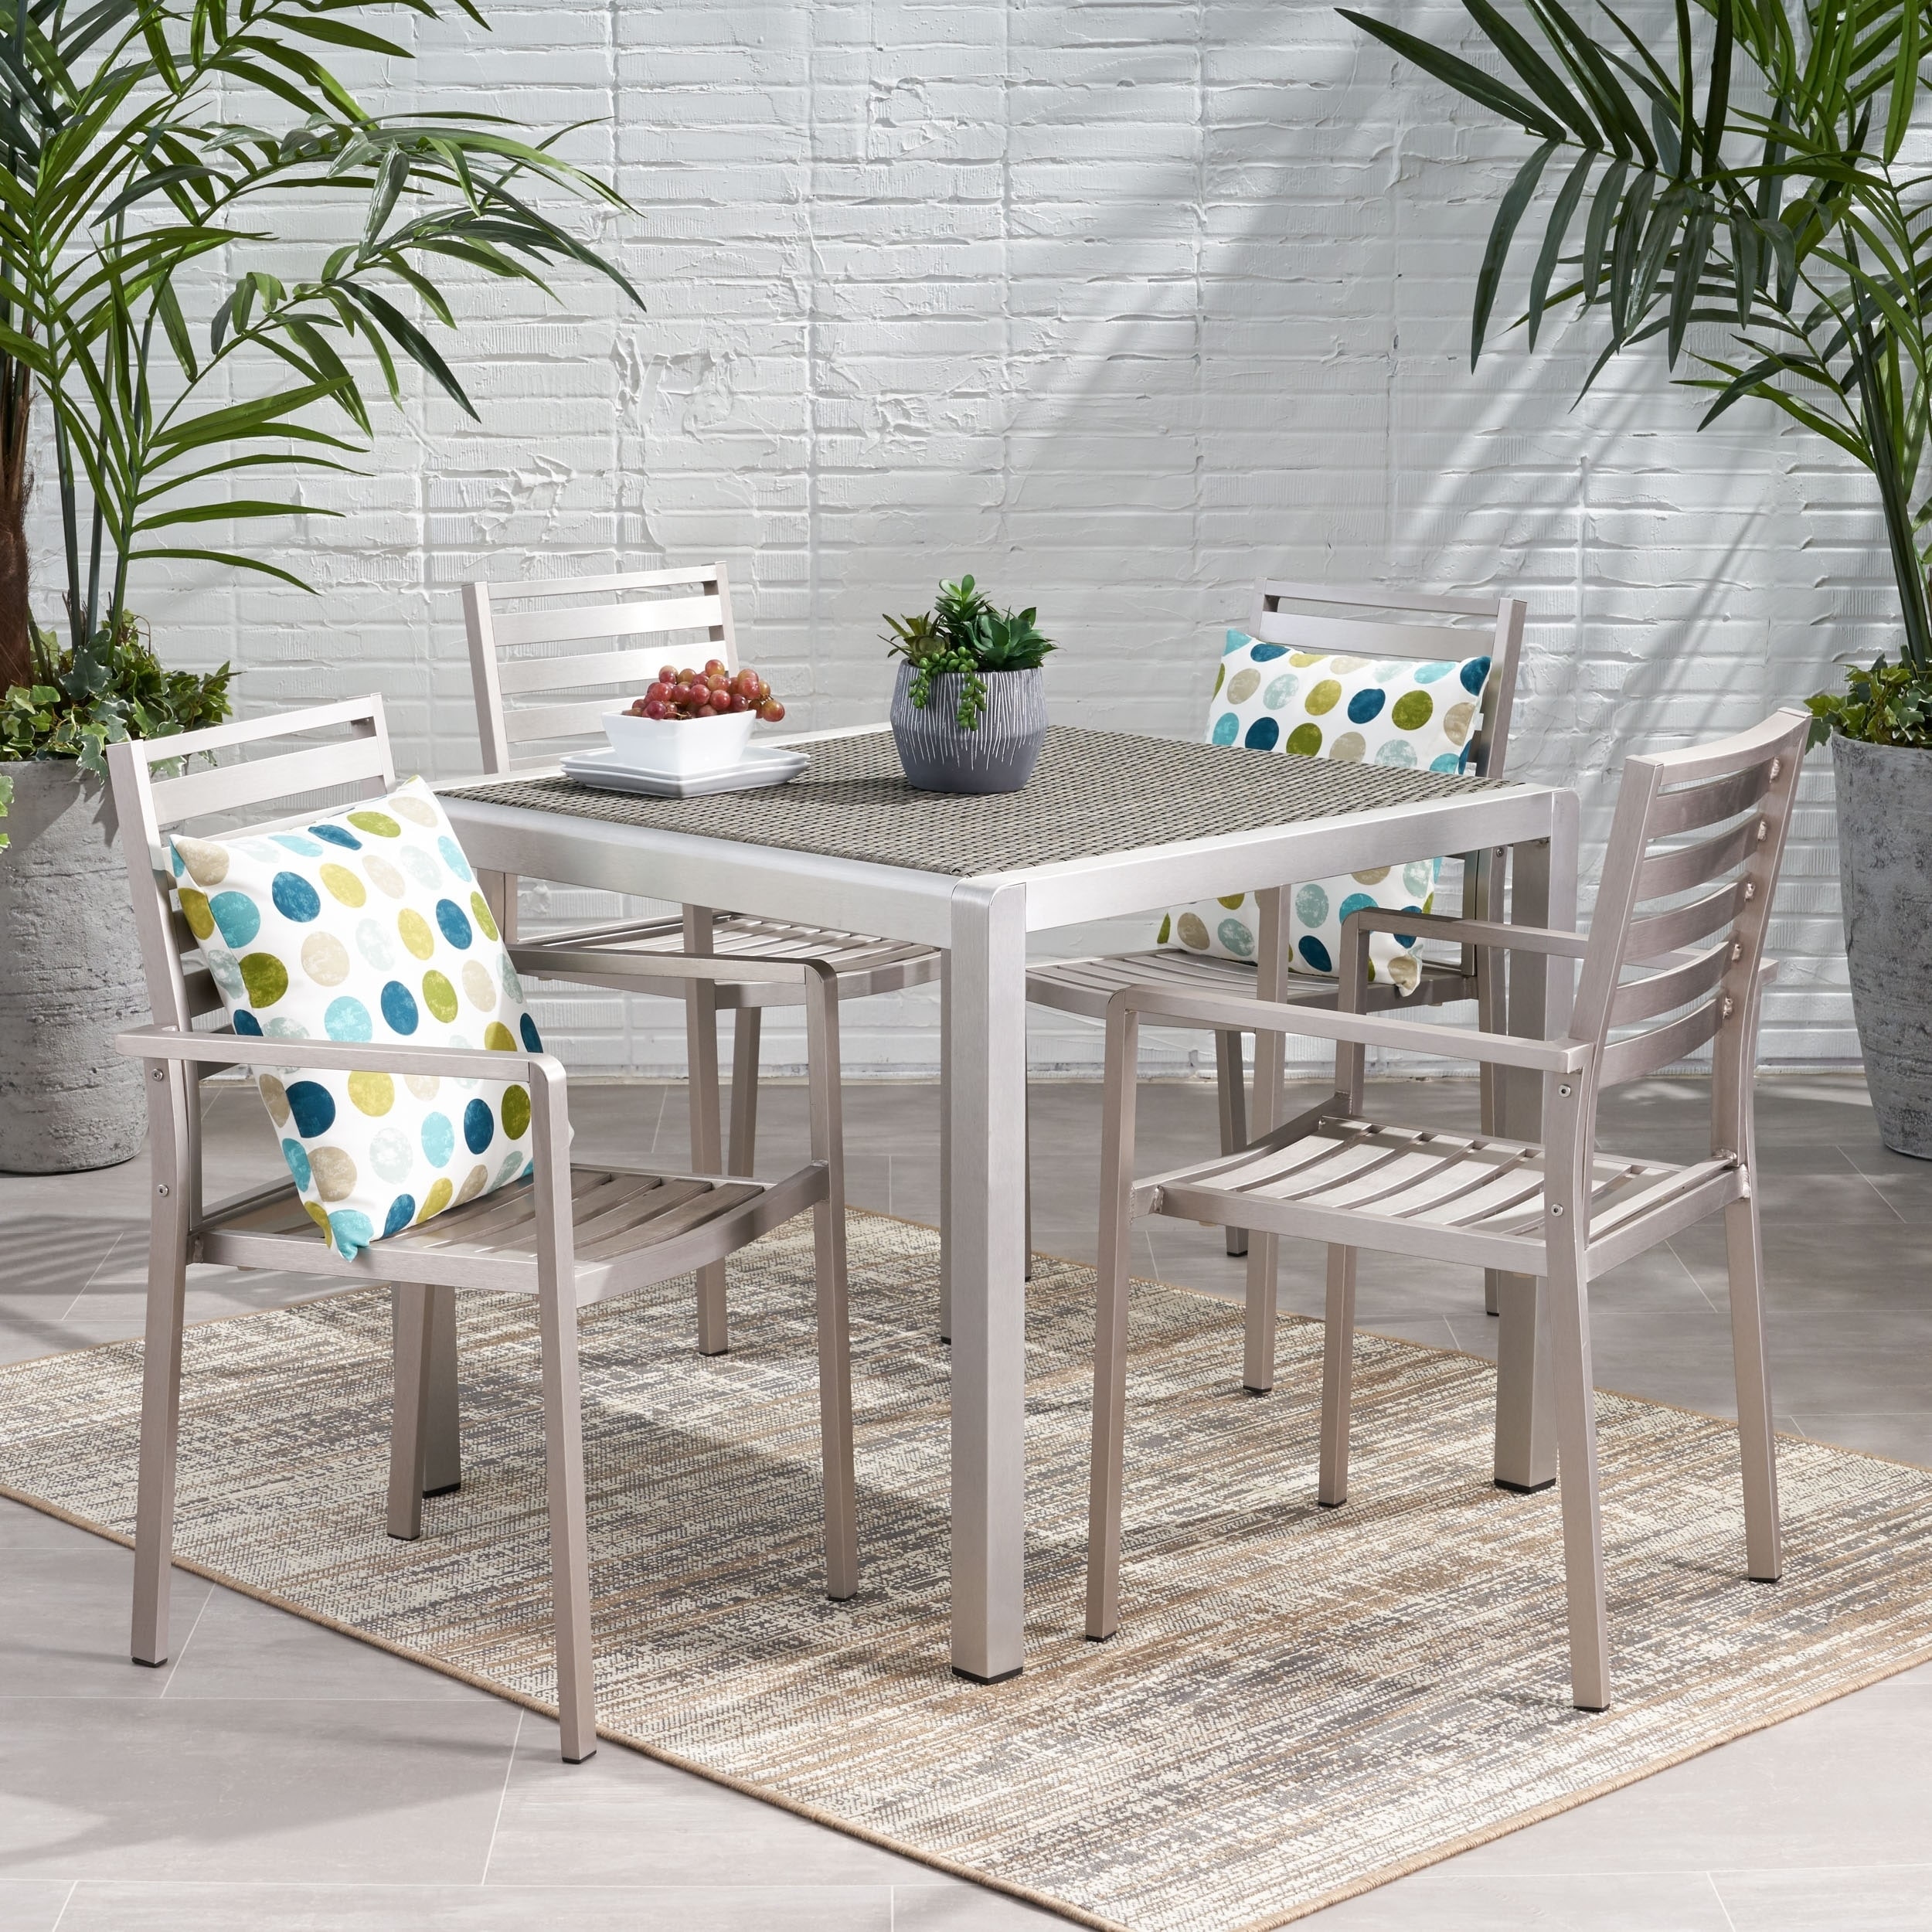 Cape Coral Outdoor Modern 4 Seater Aluminum Dining Set With Wicker Table Top By Christopher Knight Home